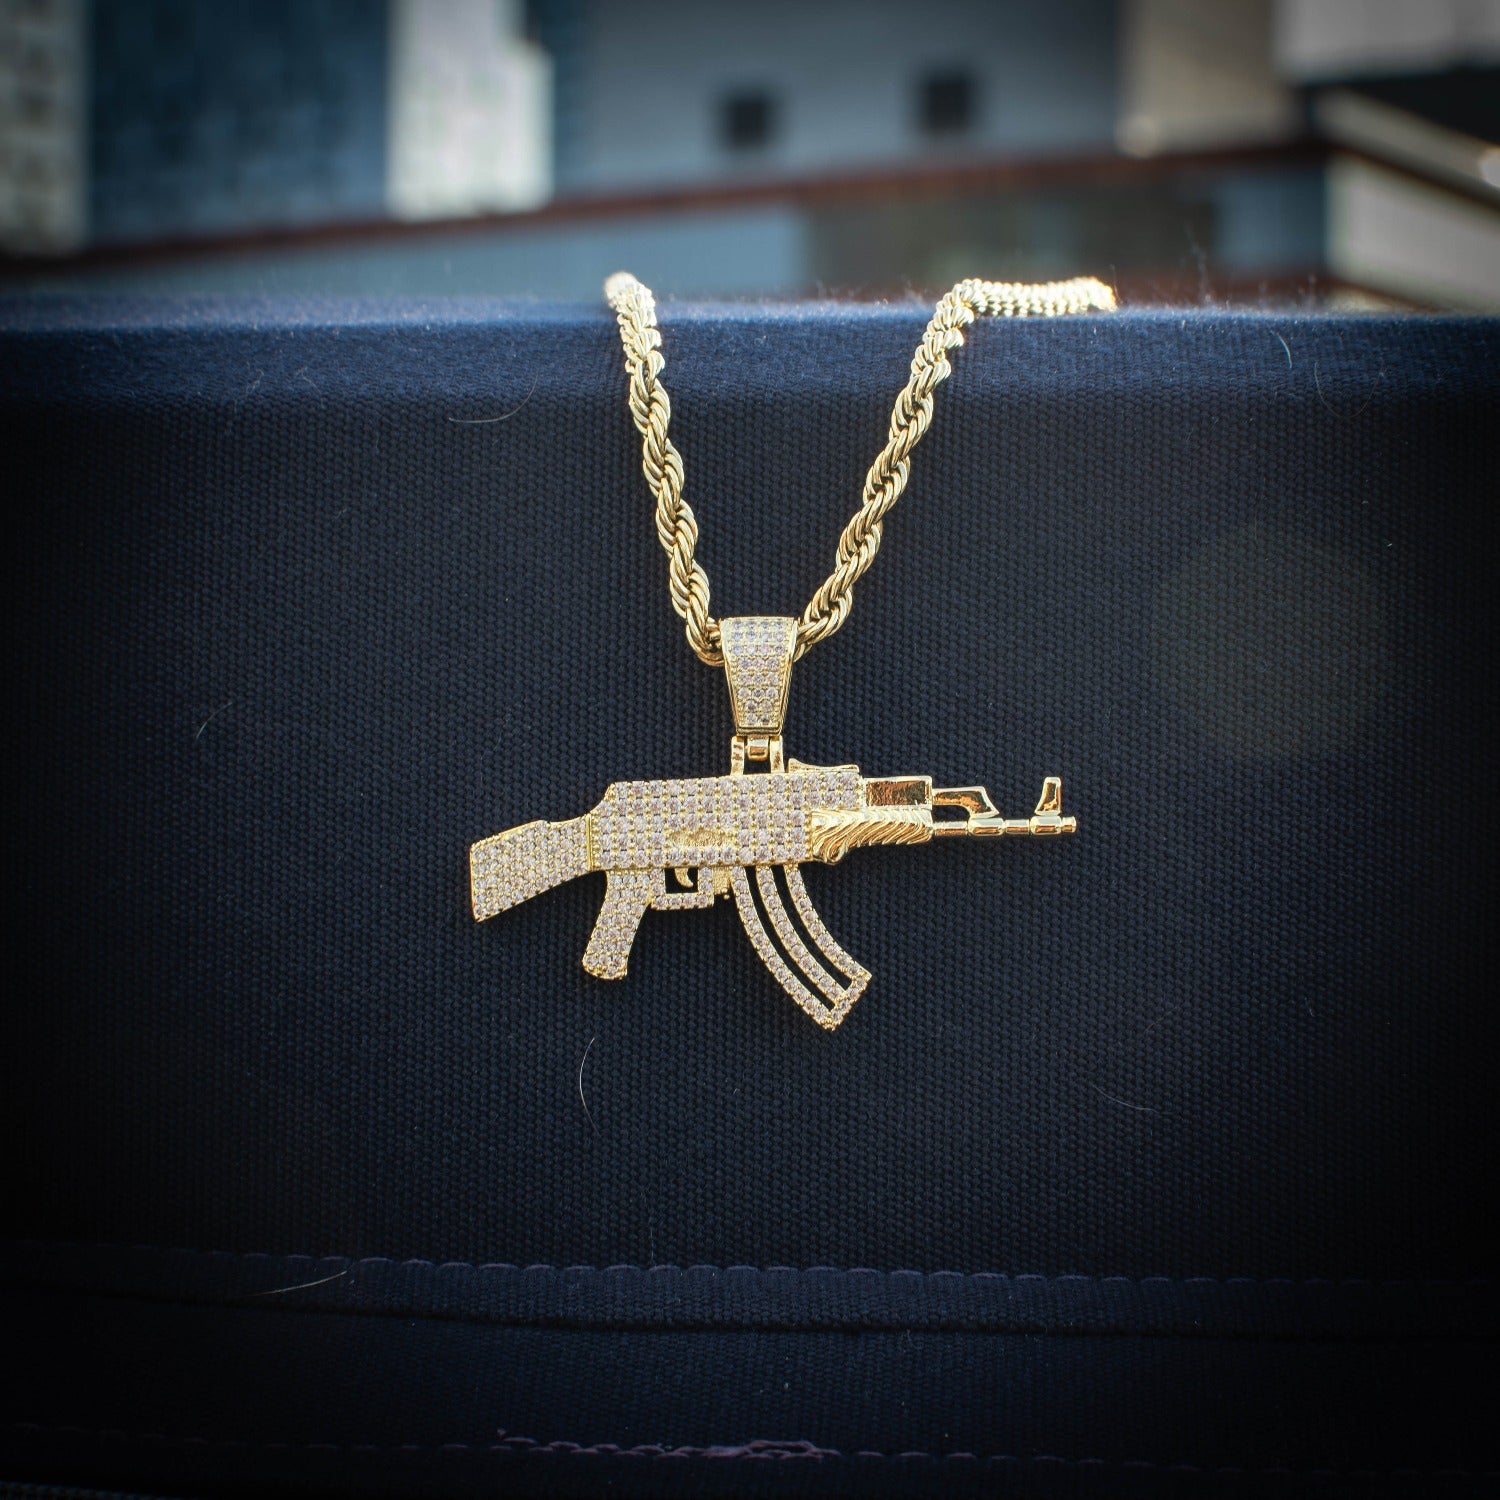 Gold Iced Out AK47 Pendant Necklace For Mens Fashion Hip Hop Jewelry Cuban  Link Chain Necklaces From Hiphop2018, $4.72 | DHgate.Com